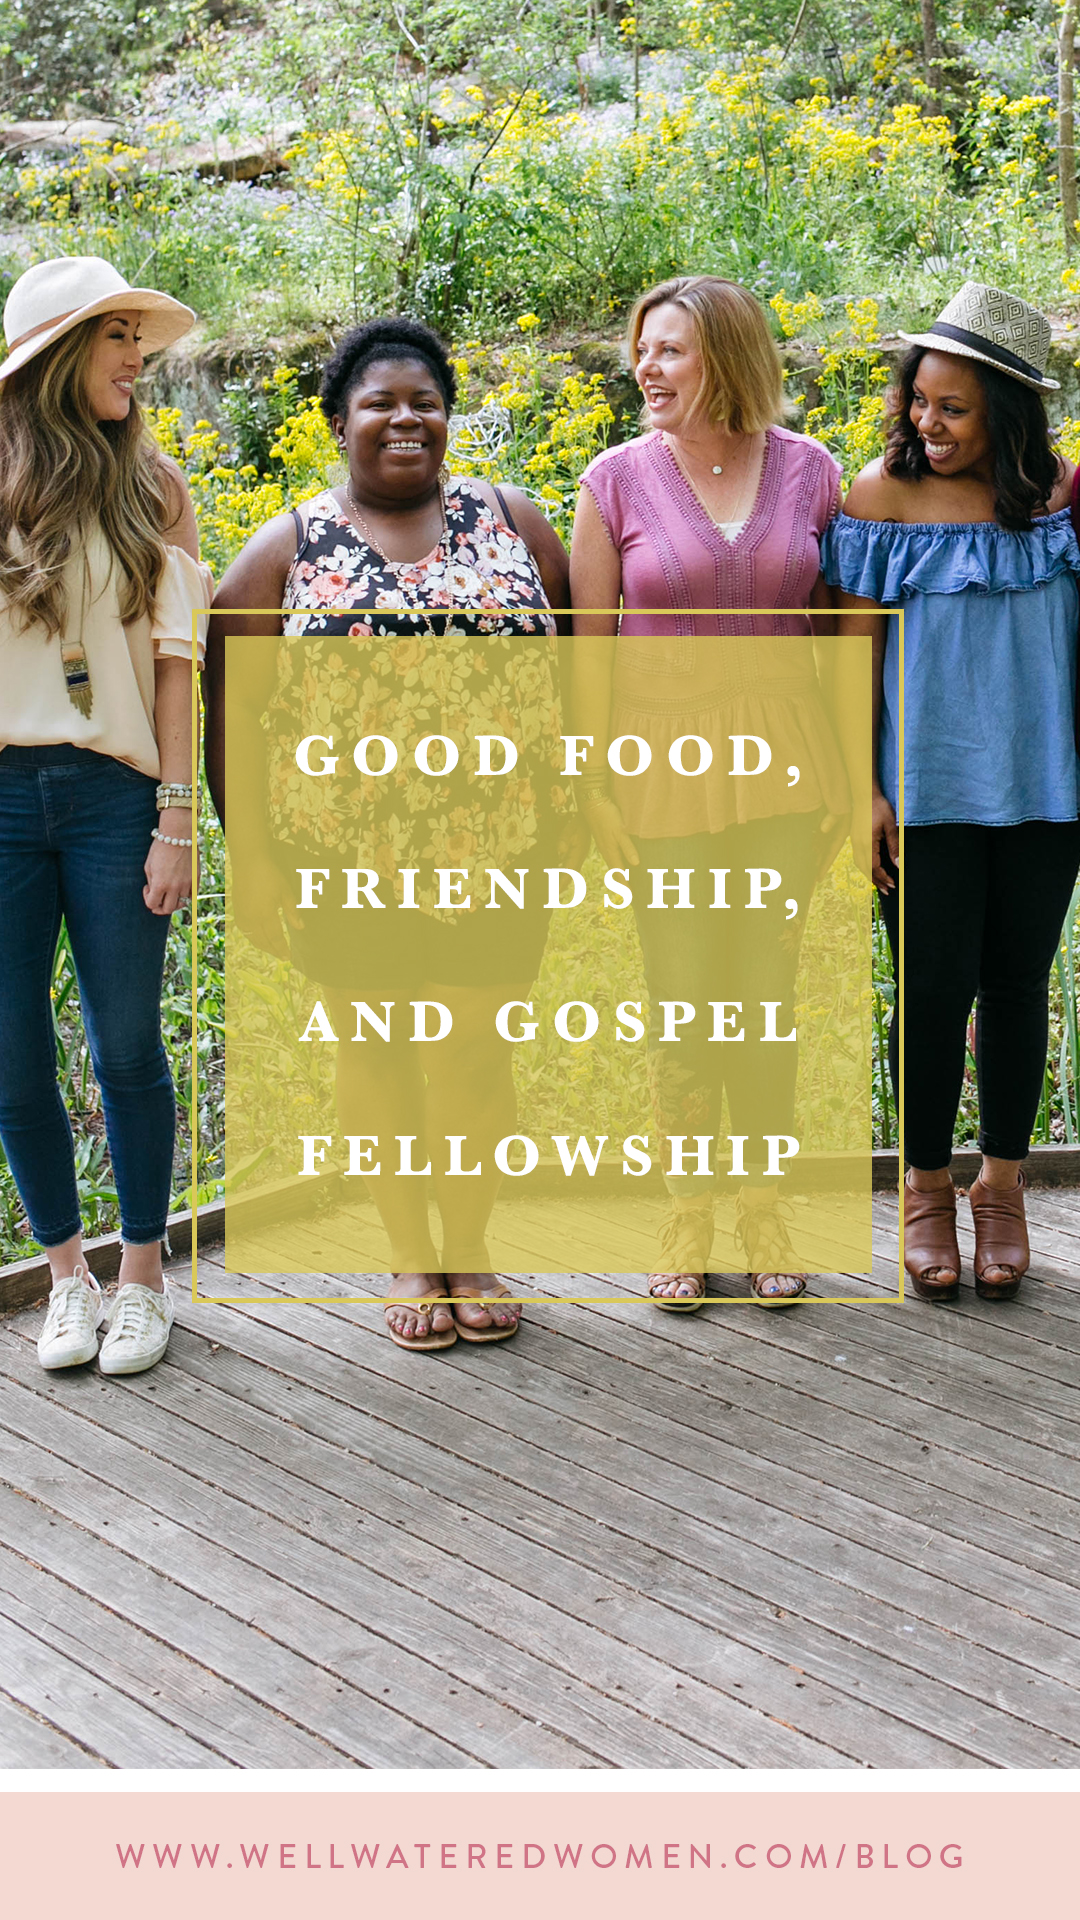 Good Food, Friendship, and Gospel Fellowship: Fellowship is so much more than potluck dinners and ice cream socials.